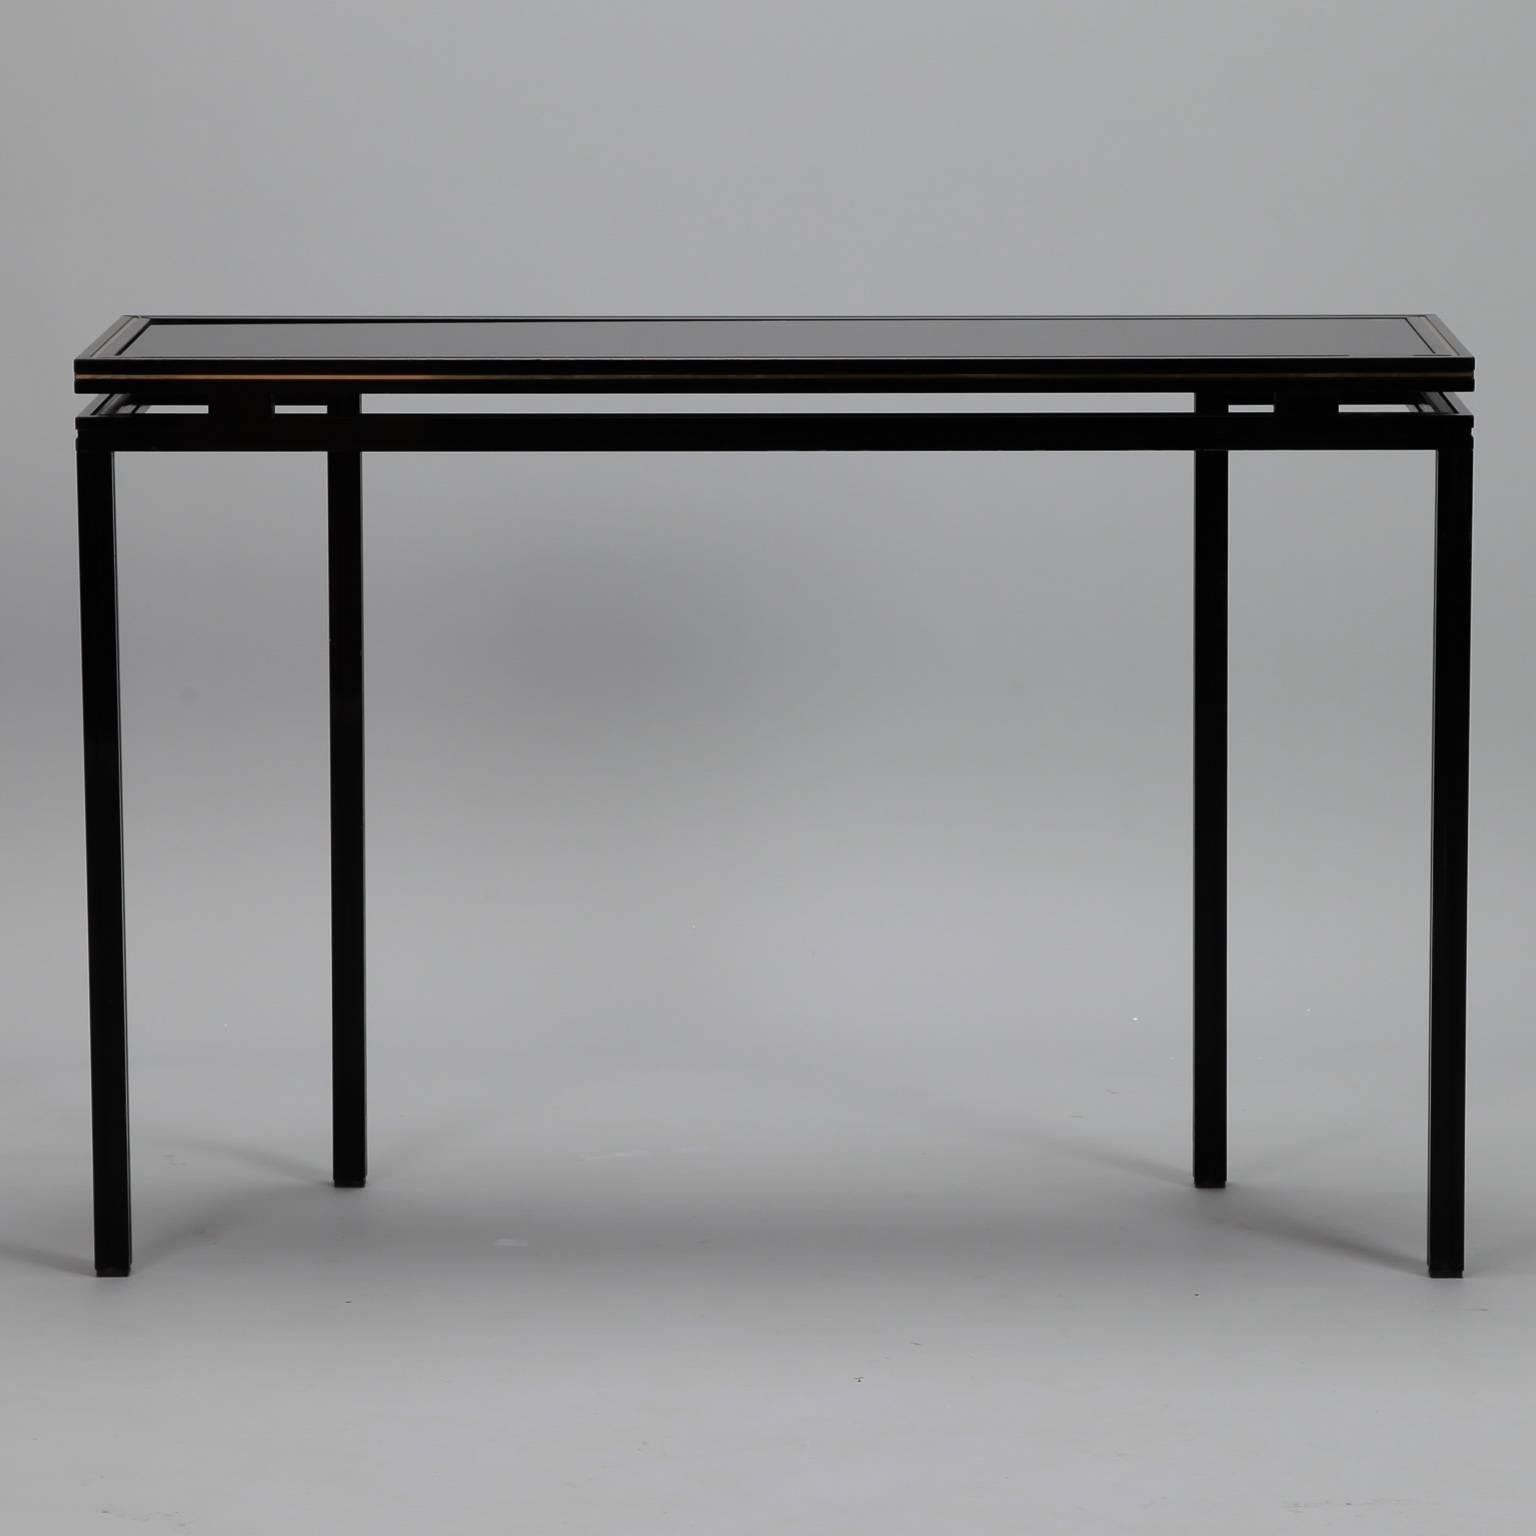 Lacquered wood and glass console by Paris maker Pierre Vandel features sleek, architectural lines and a black finish accented with gold, circa 1970s. Other pieces from this series or style available at the time of posting. Please inquire.